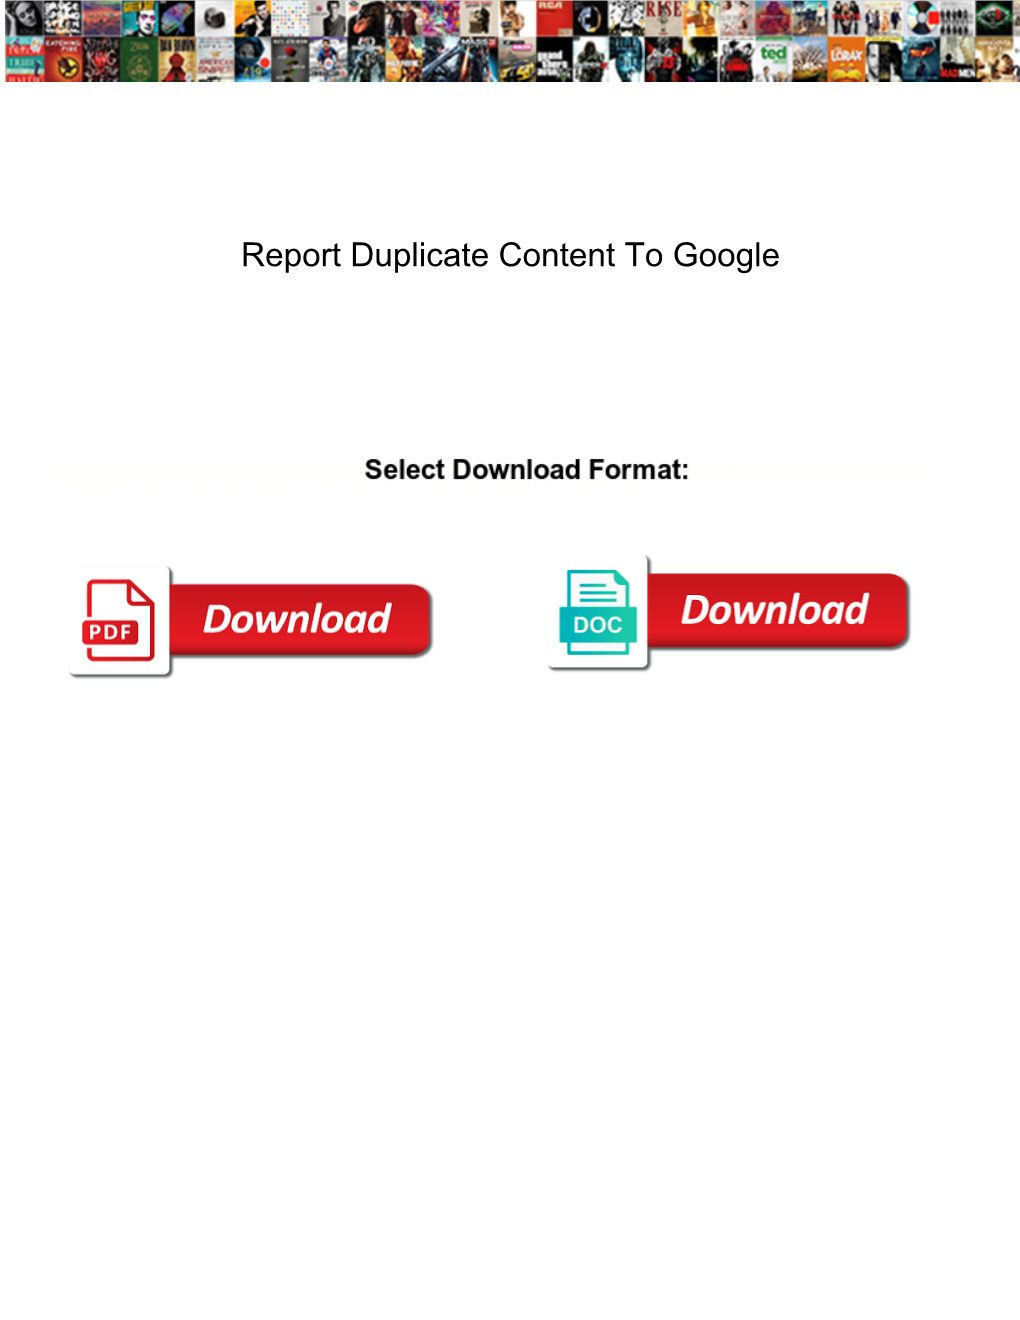 Report Duplicate Content to Google